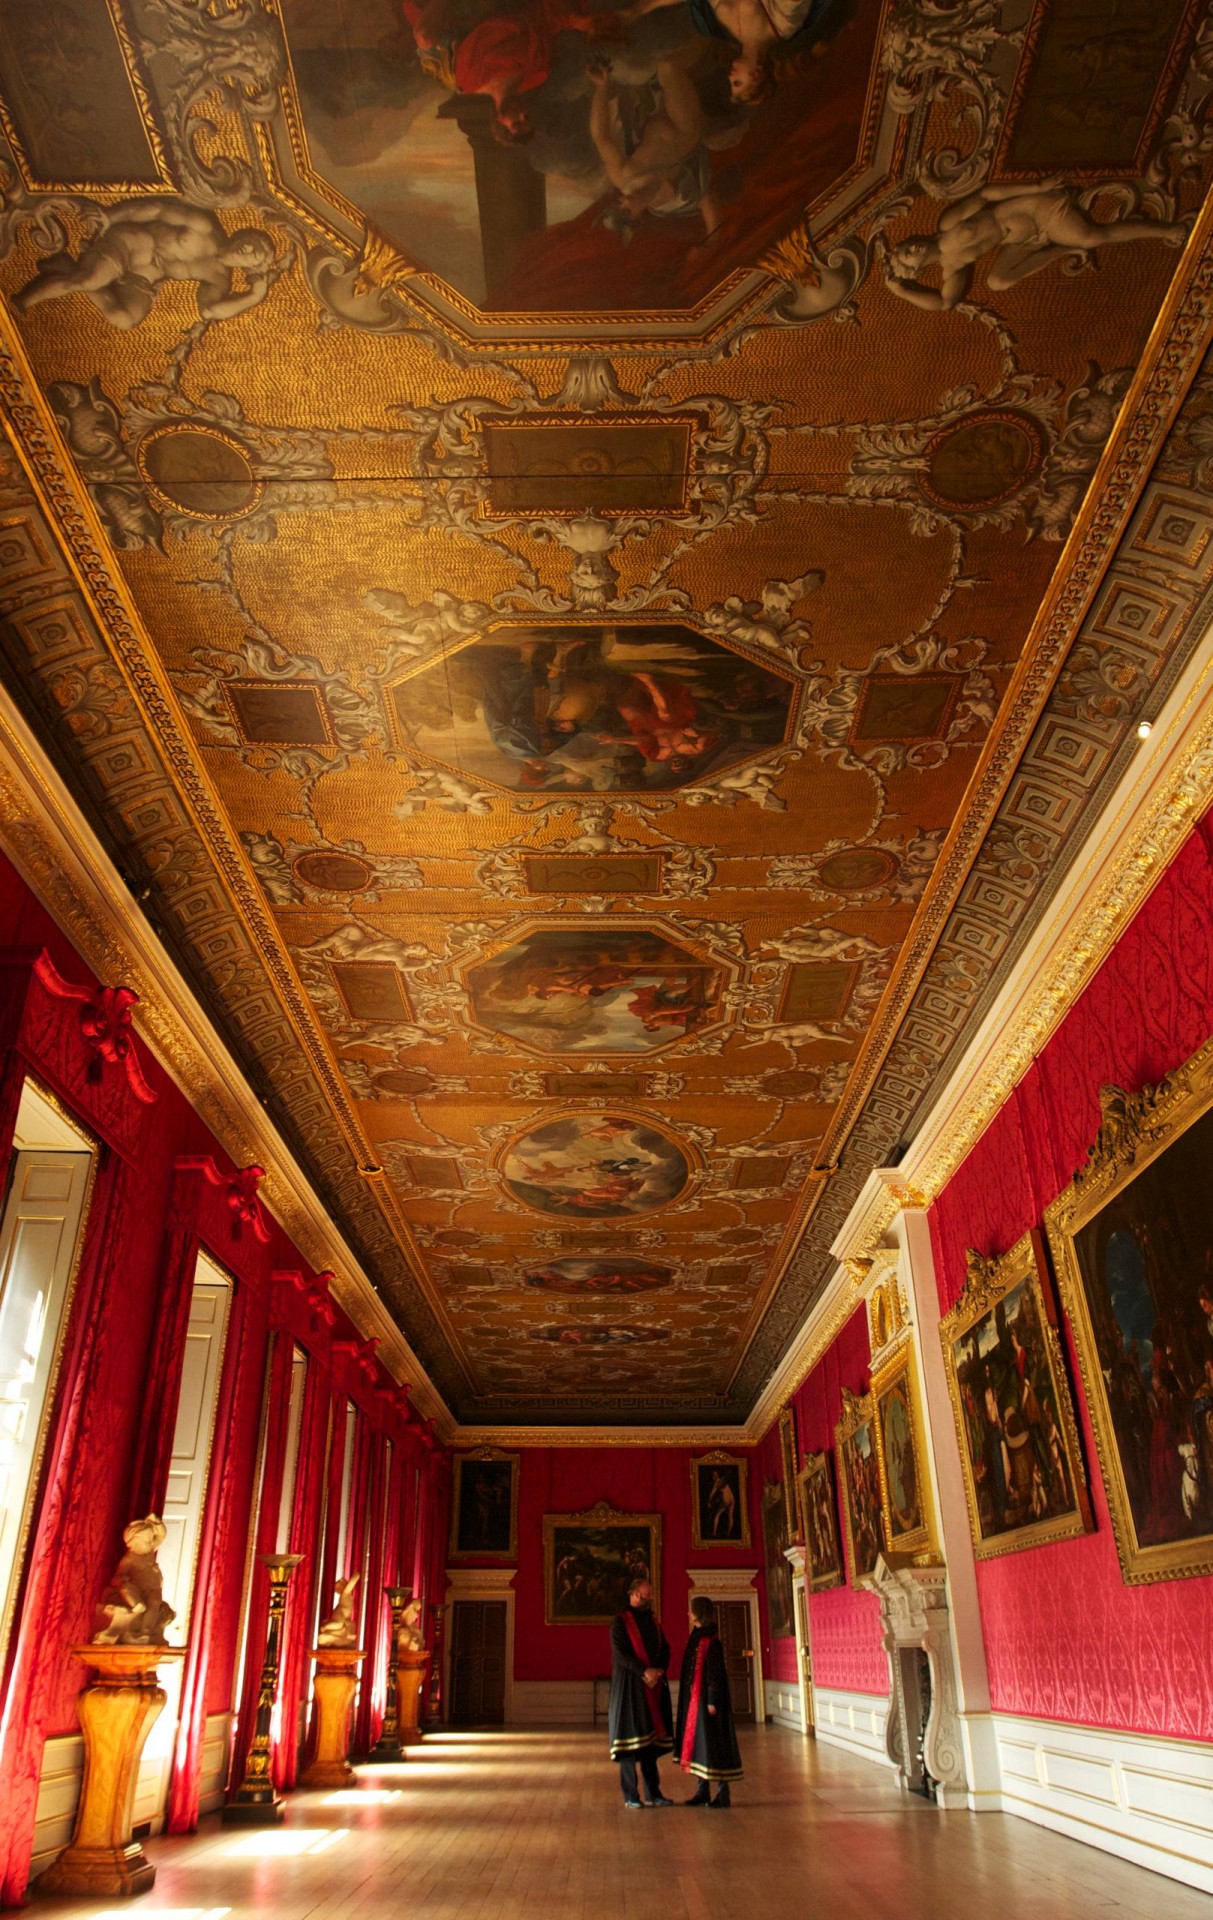 The King's Gallery at Kensington Palace was built for William III in 1695. The room, which is 96 feet long, was intended to house the finest pictures in the Royal Collection. It was also here, on 3rd March1702 that William was taken ill. He died five days later.